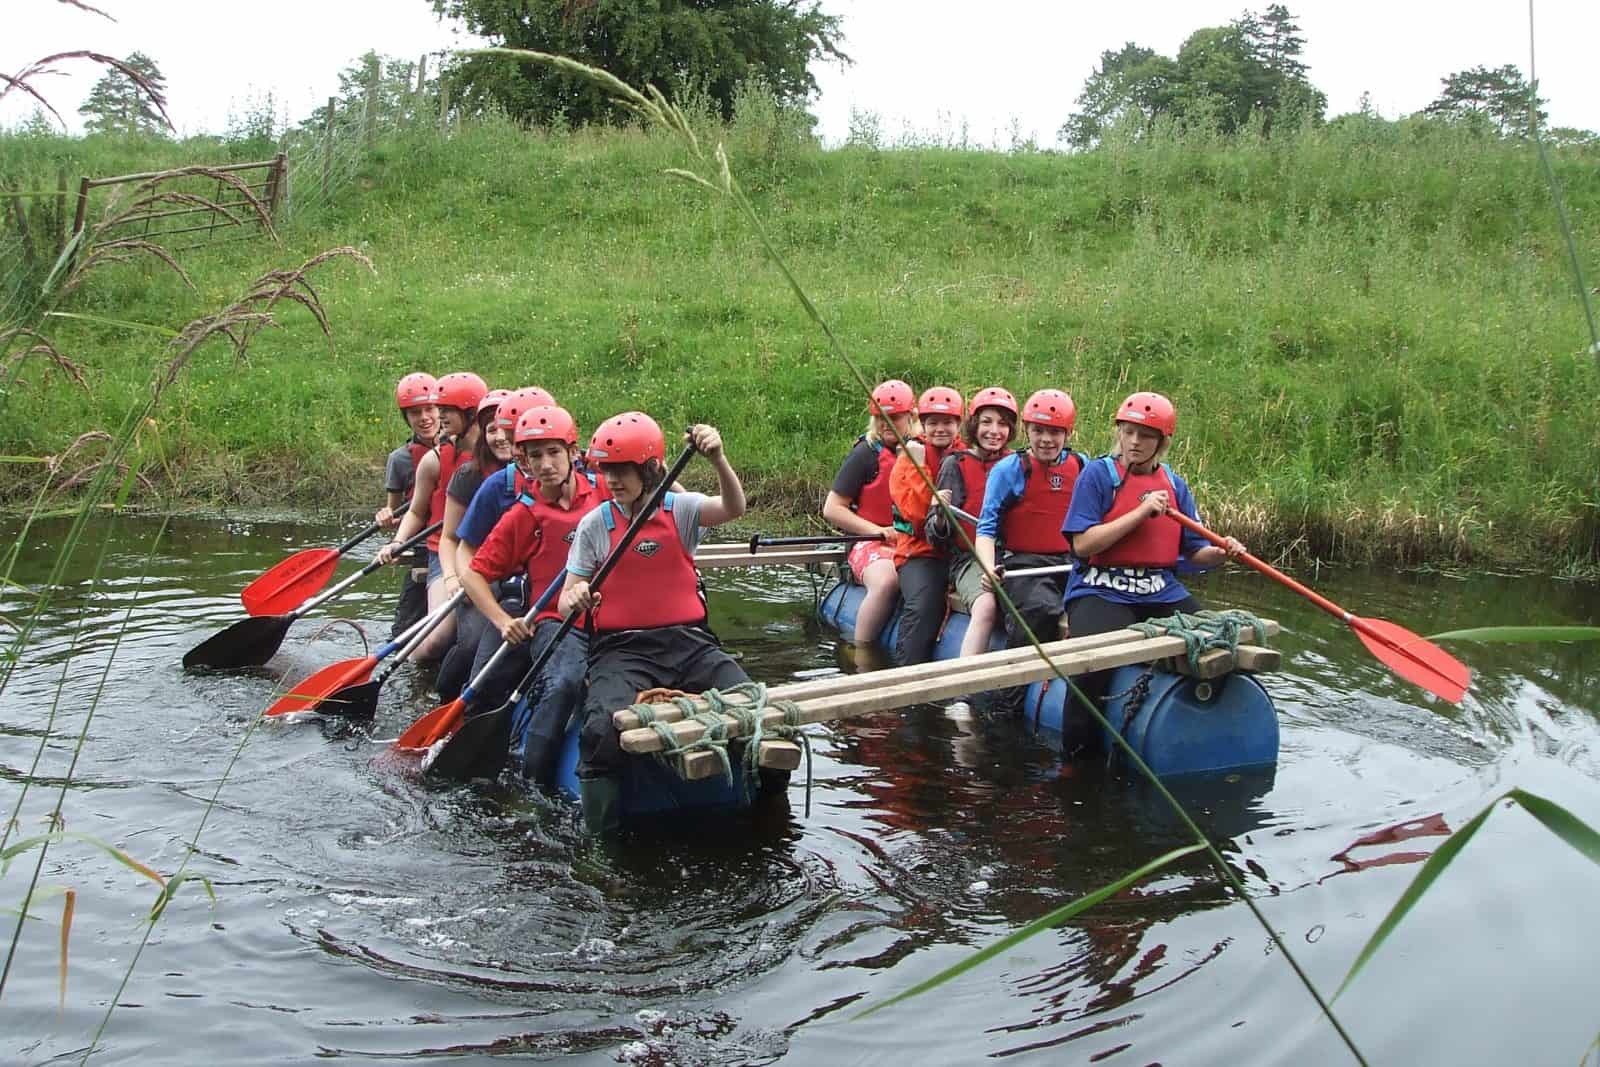 key stage 3 students in a raft